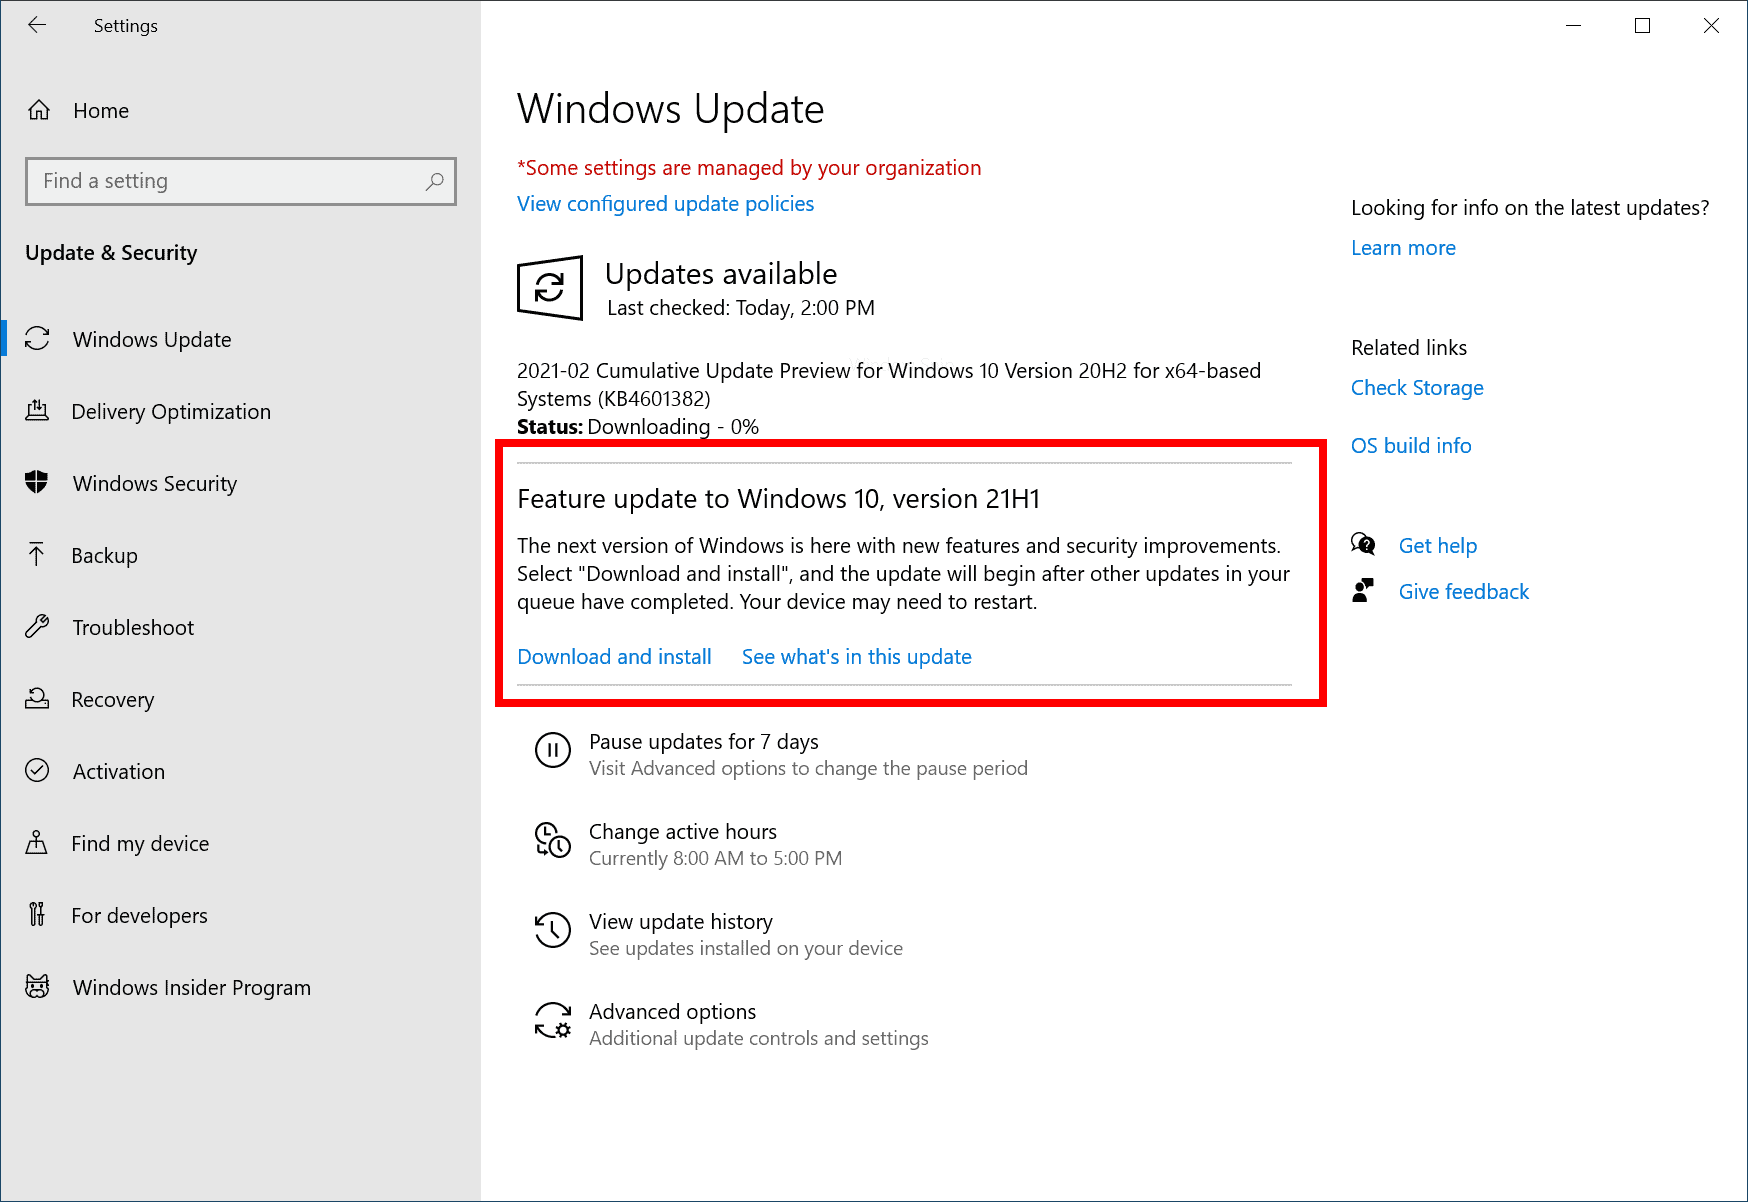 When is Windows 10 version 21H1 going to be released?